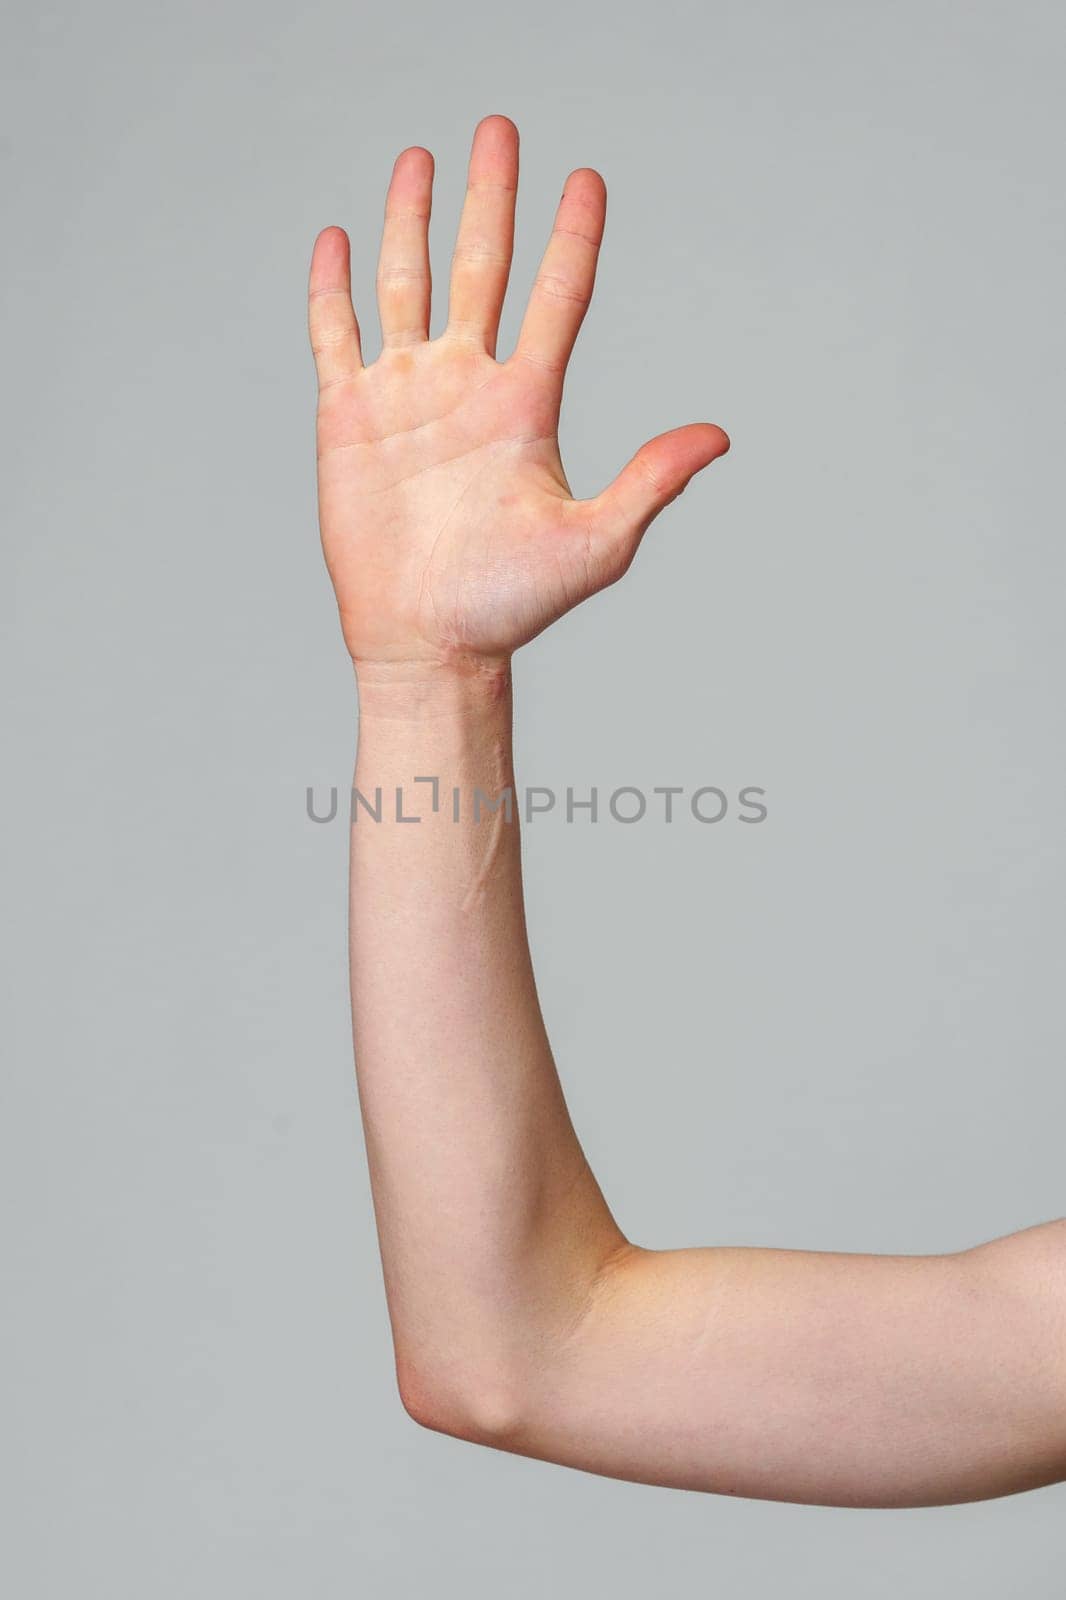 A person standing with one hand raised high in the air, reaching towards the sky. The individuals palm is open and fingers are extended, showcasing a gesture of strength or readiness.